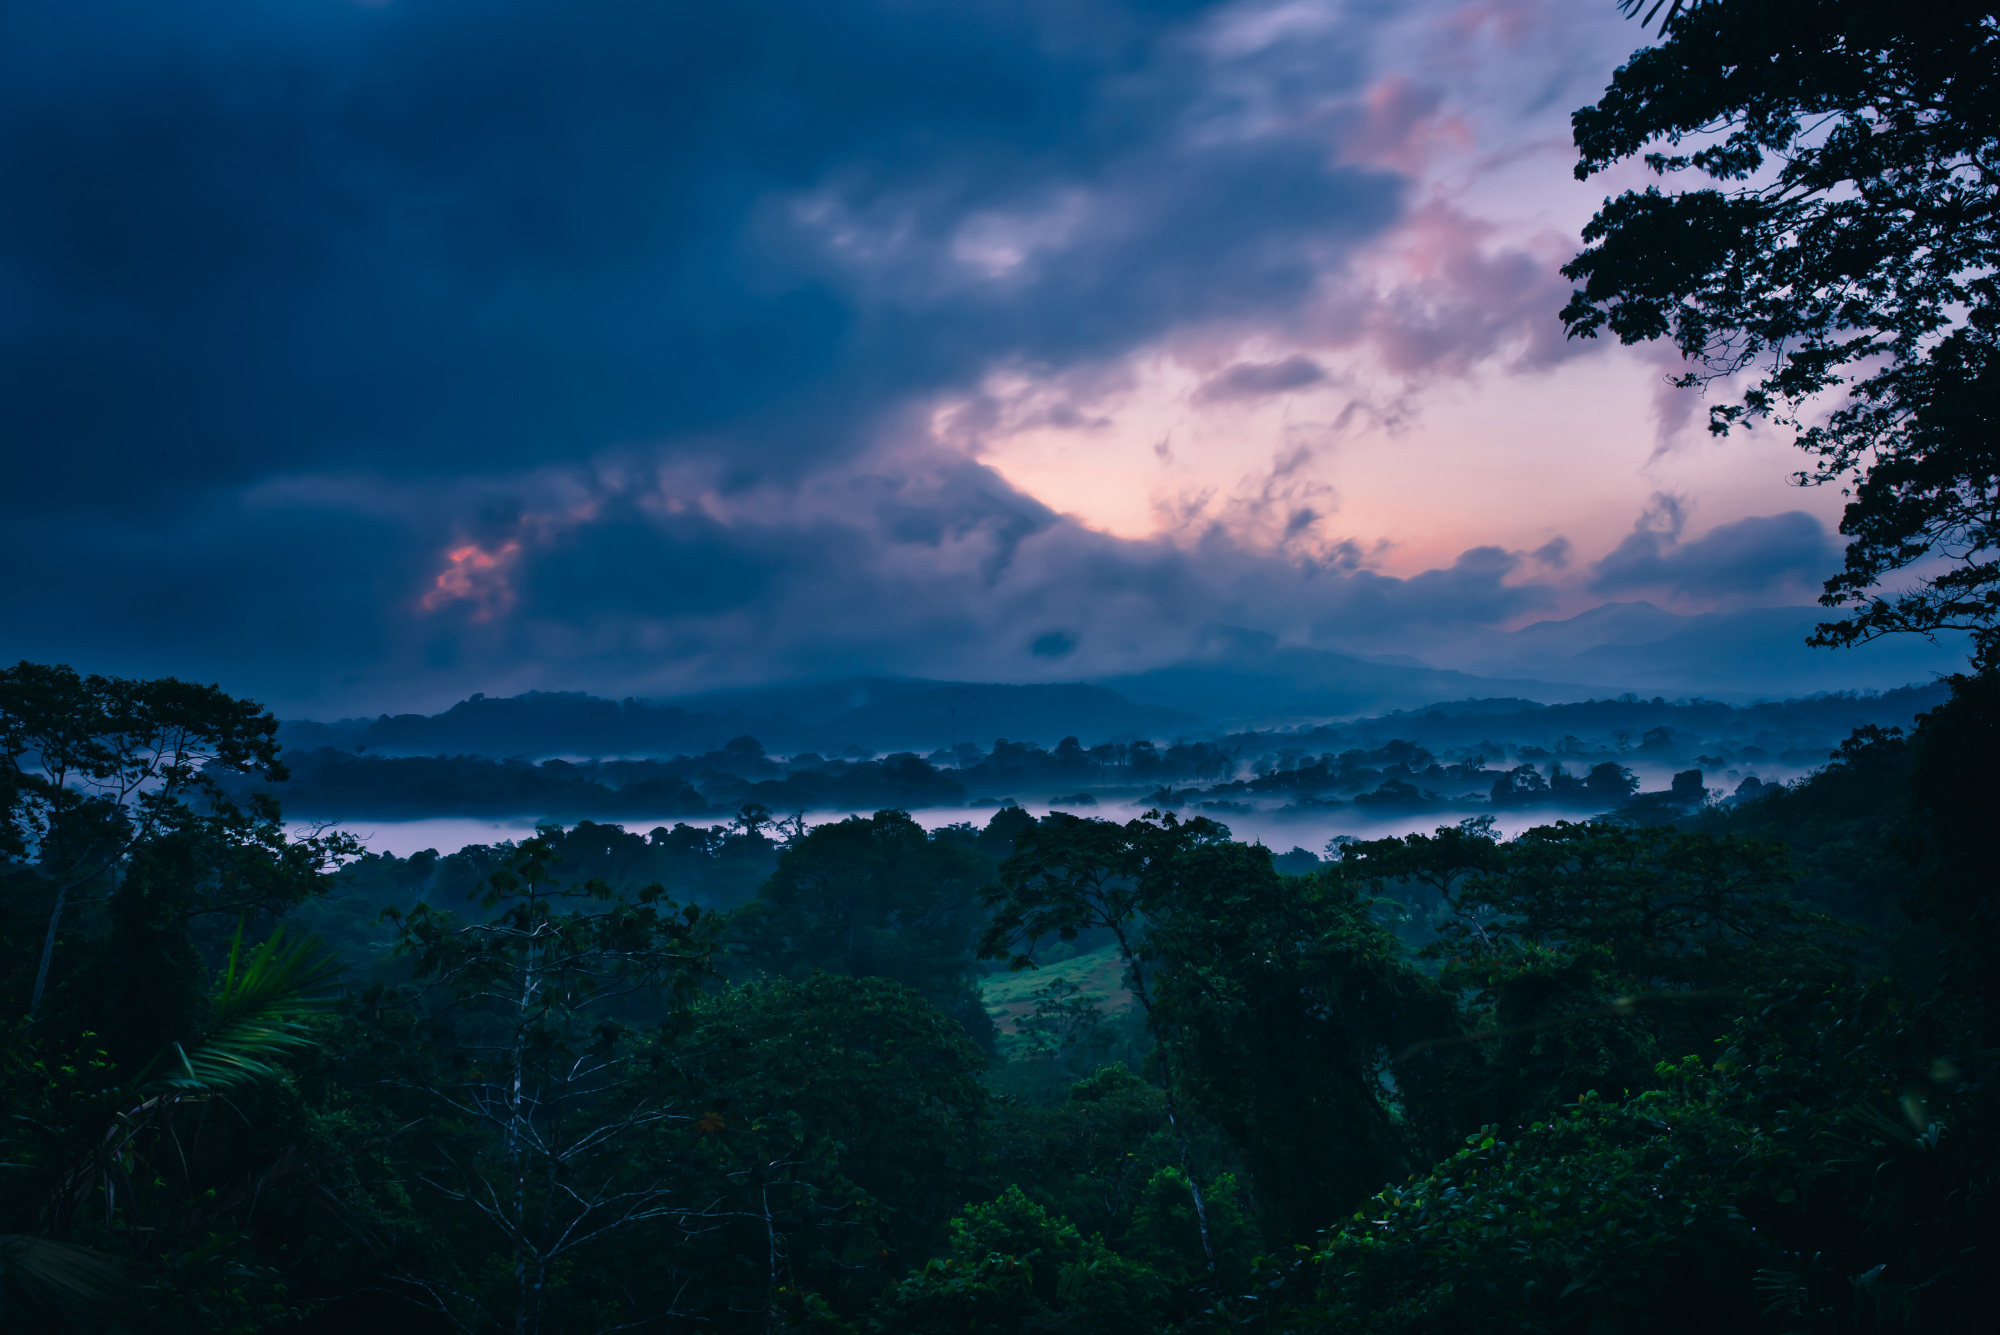 A night shot of the Costa Rican landscape with looming clouds